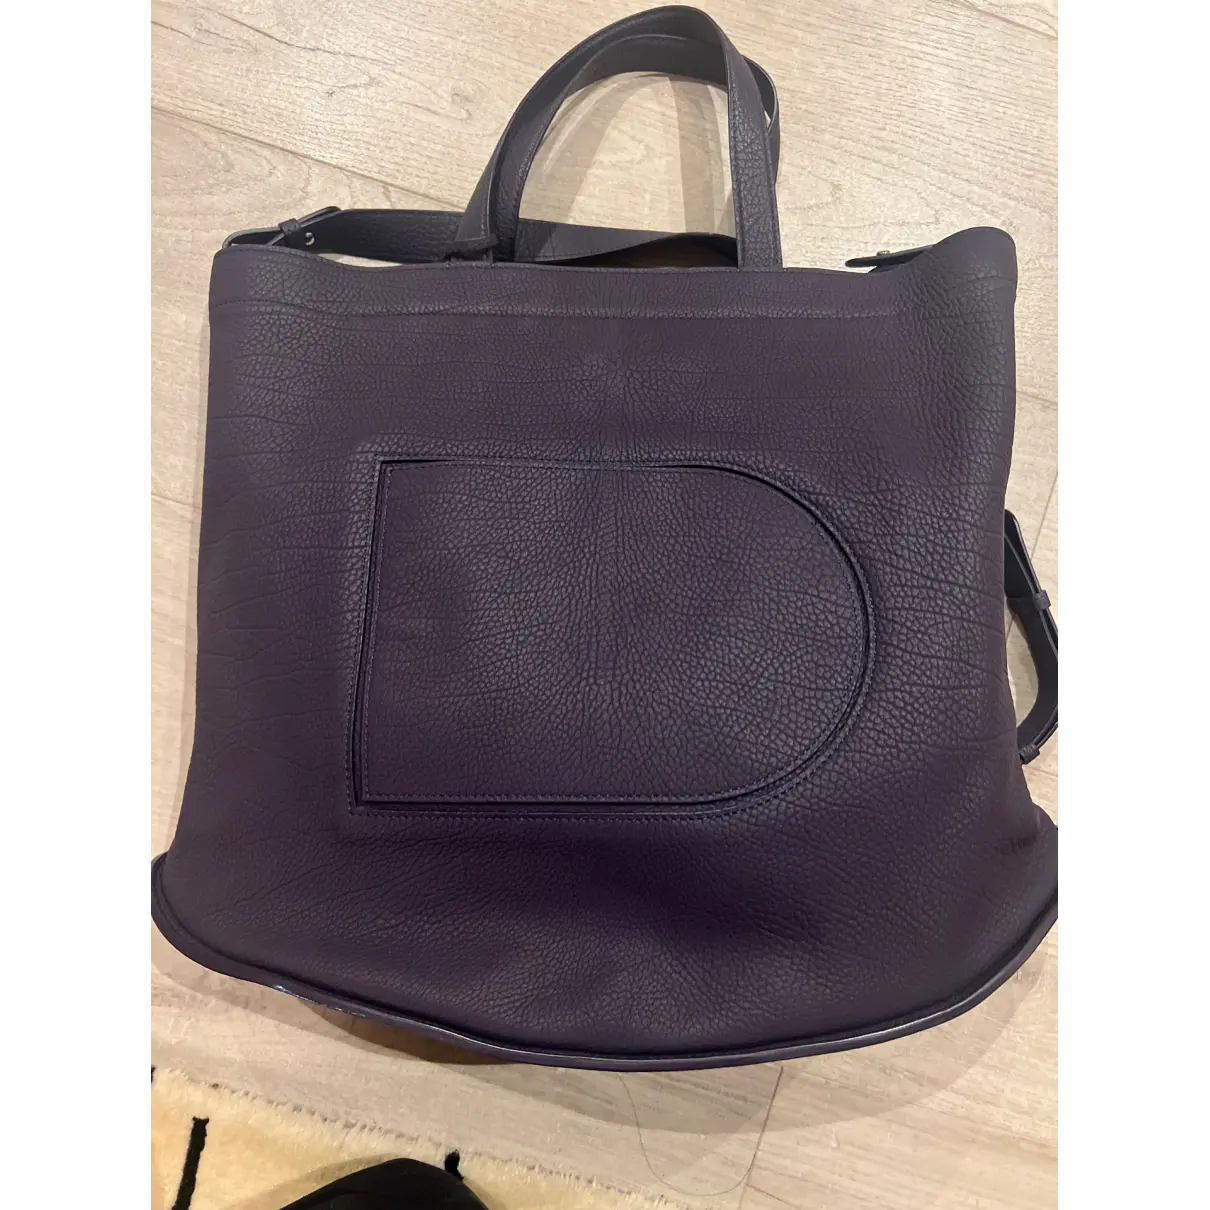 Buy Delvaux Pin leather tote online